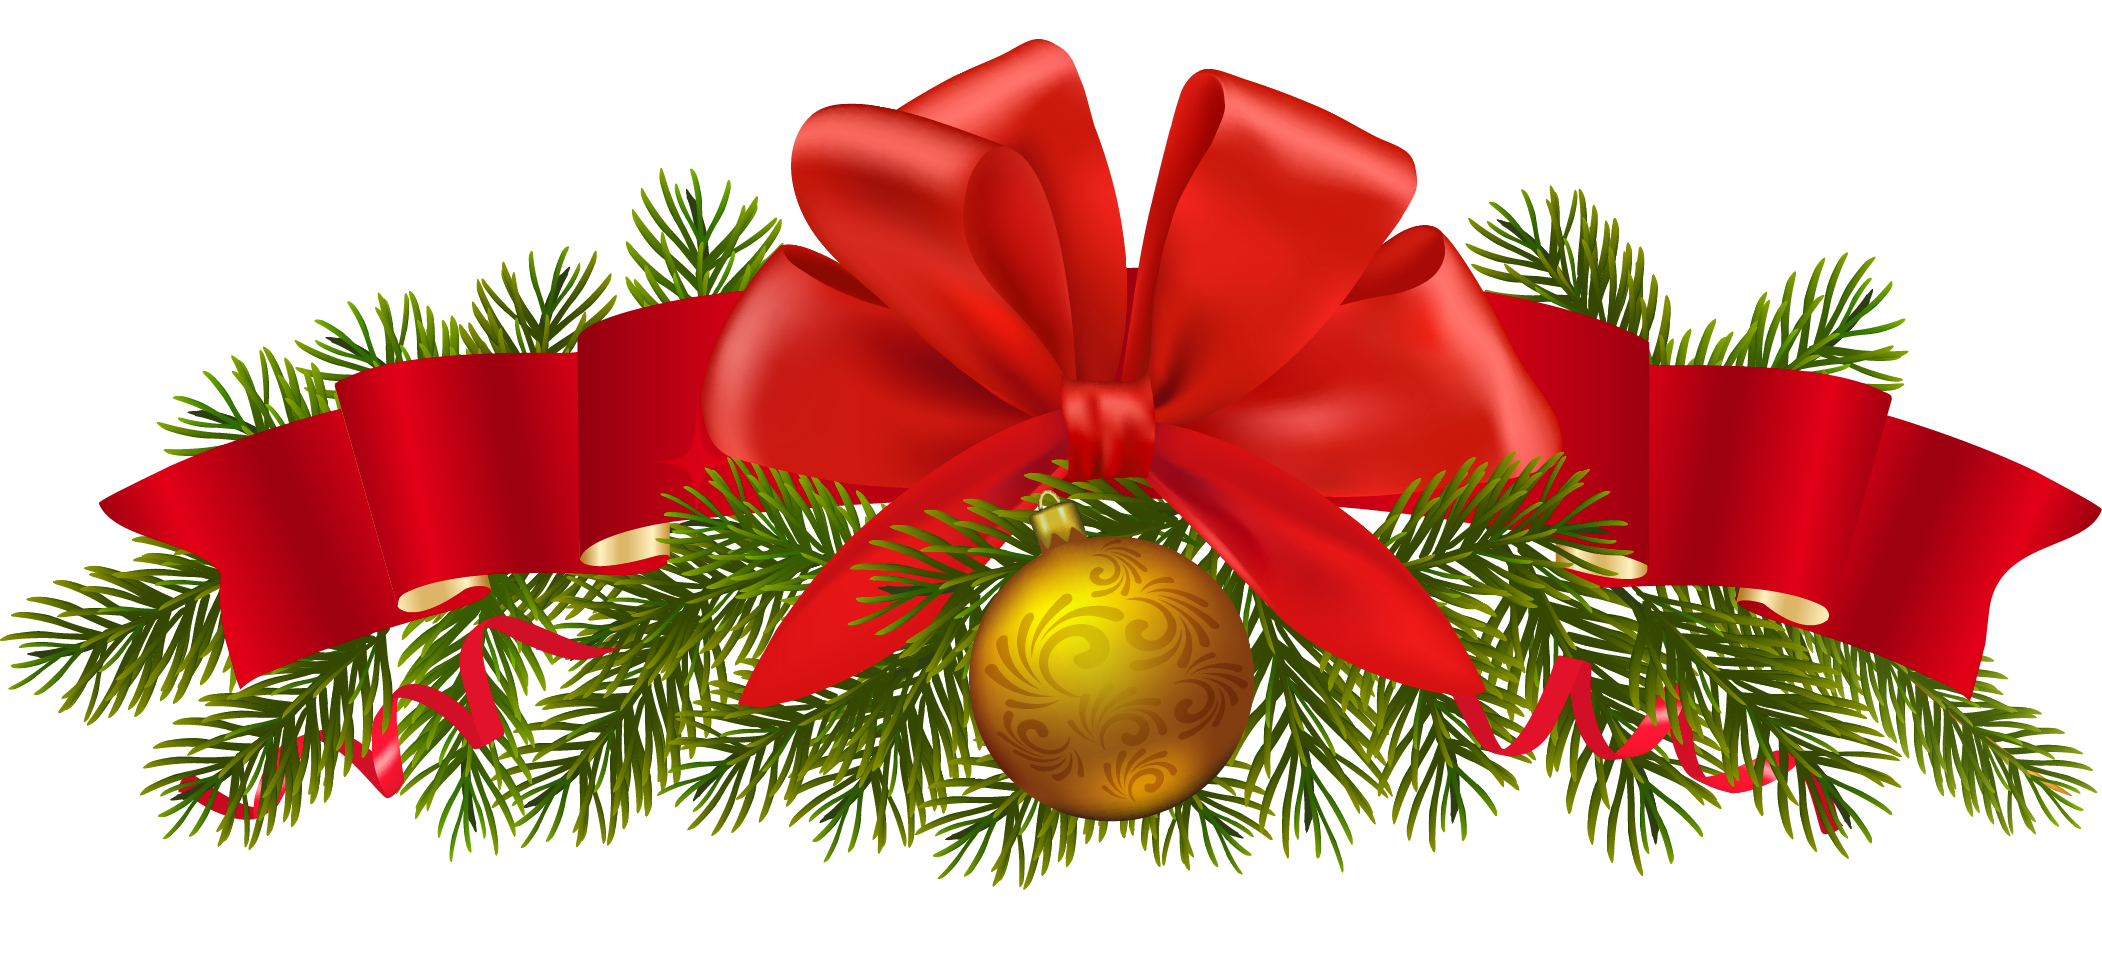 Christmas Decorations Images Free   Cliparts Co